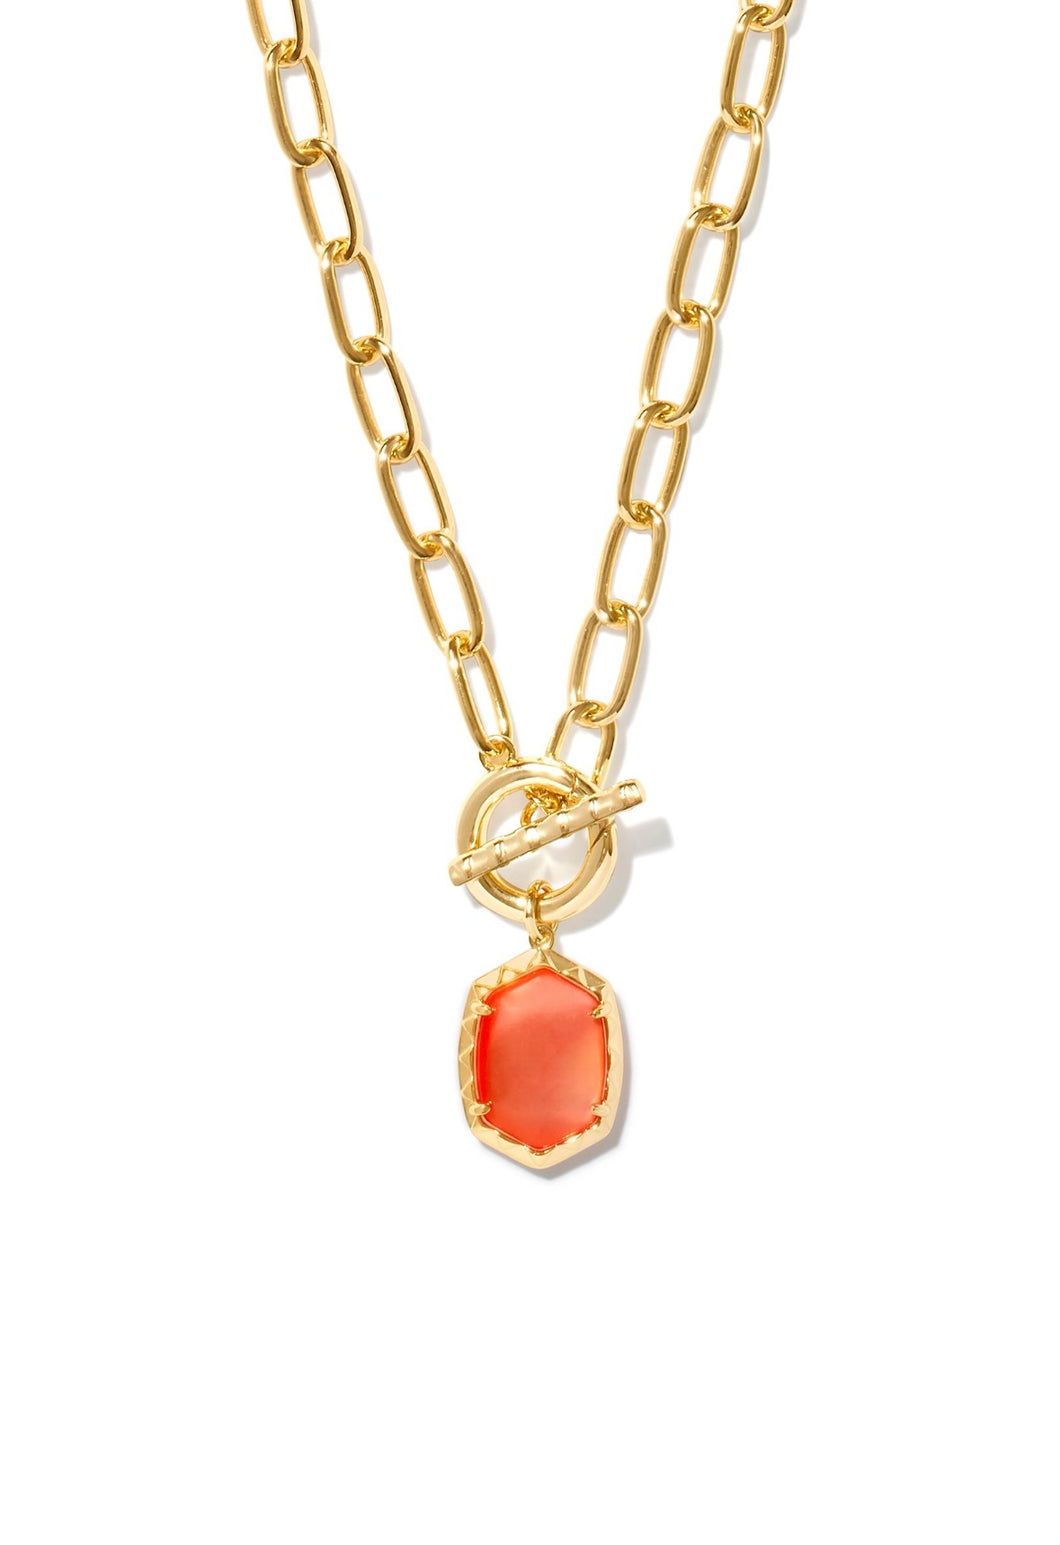 Kendra Scott: Daphne Link Chain Necklace in Gold Coral Pink MOP